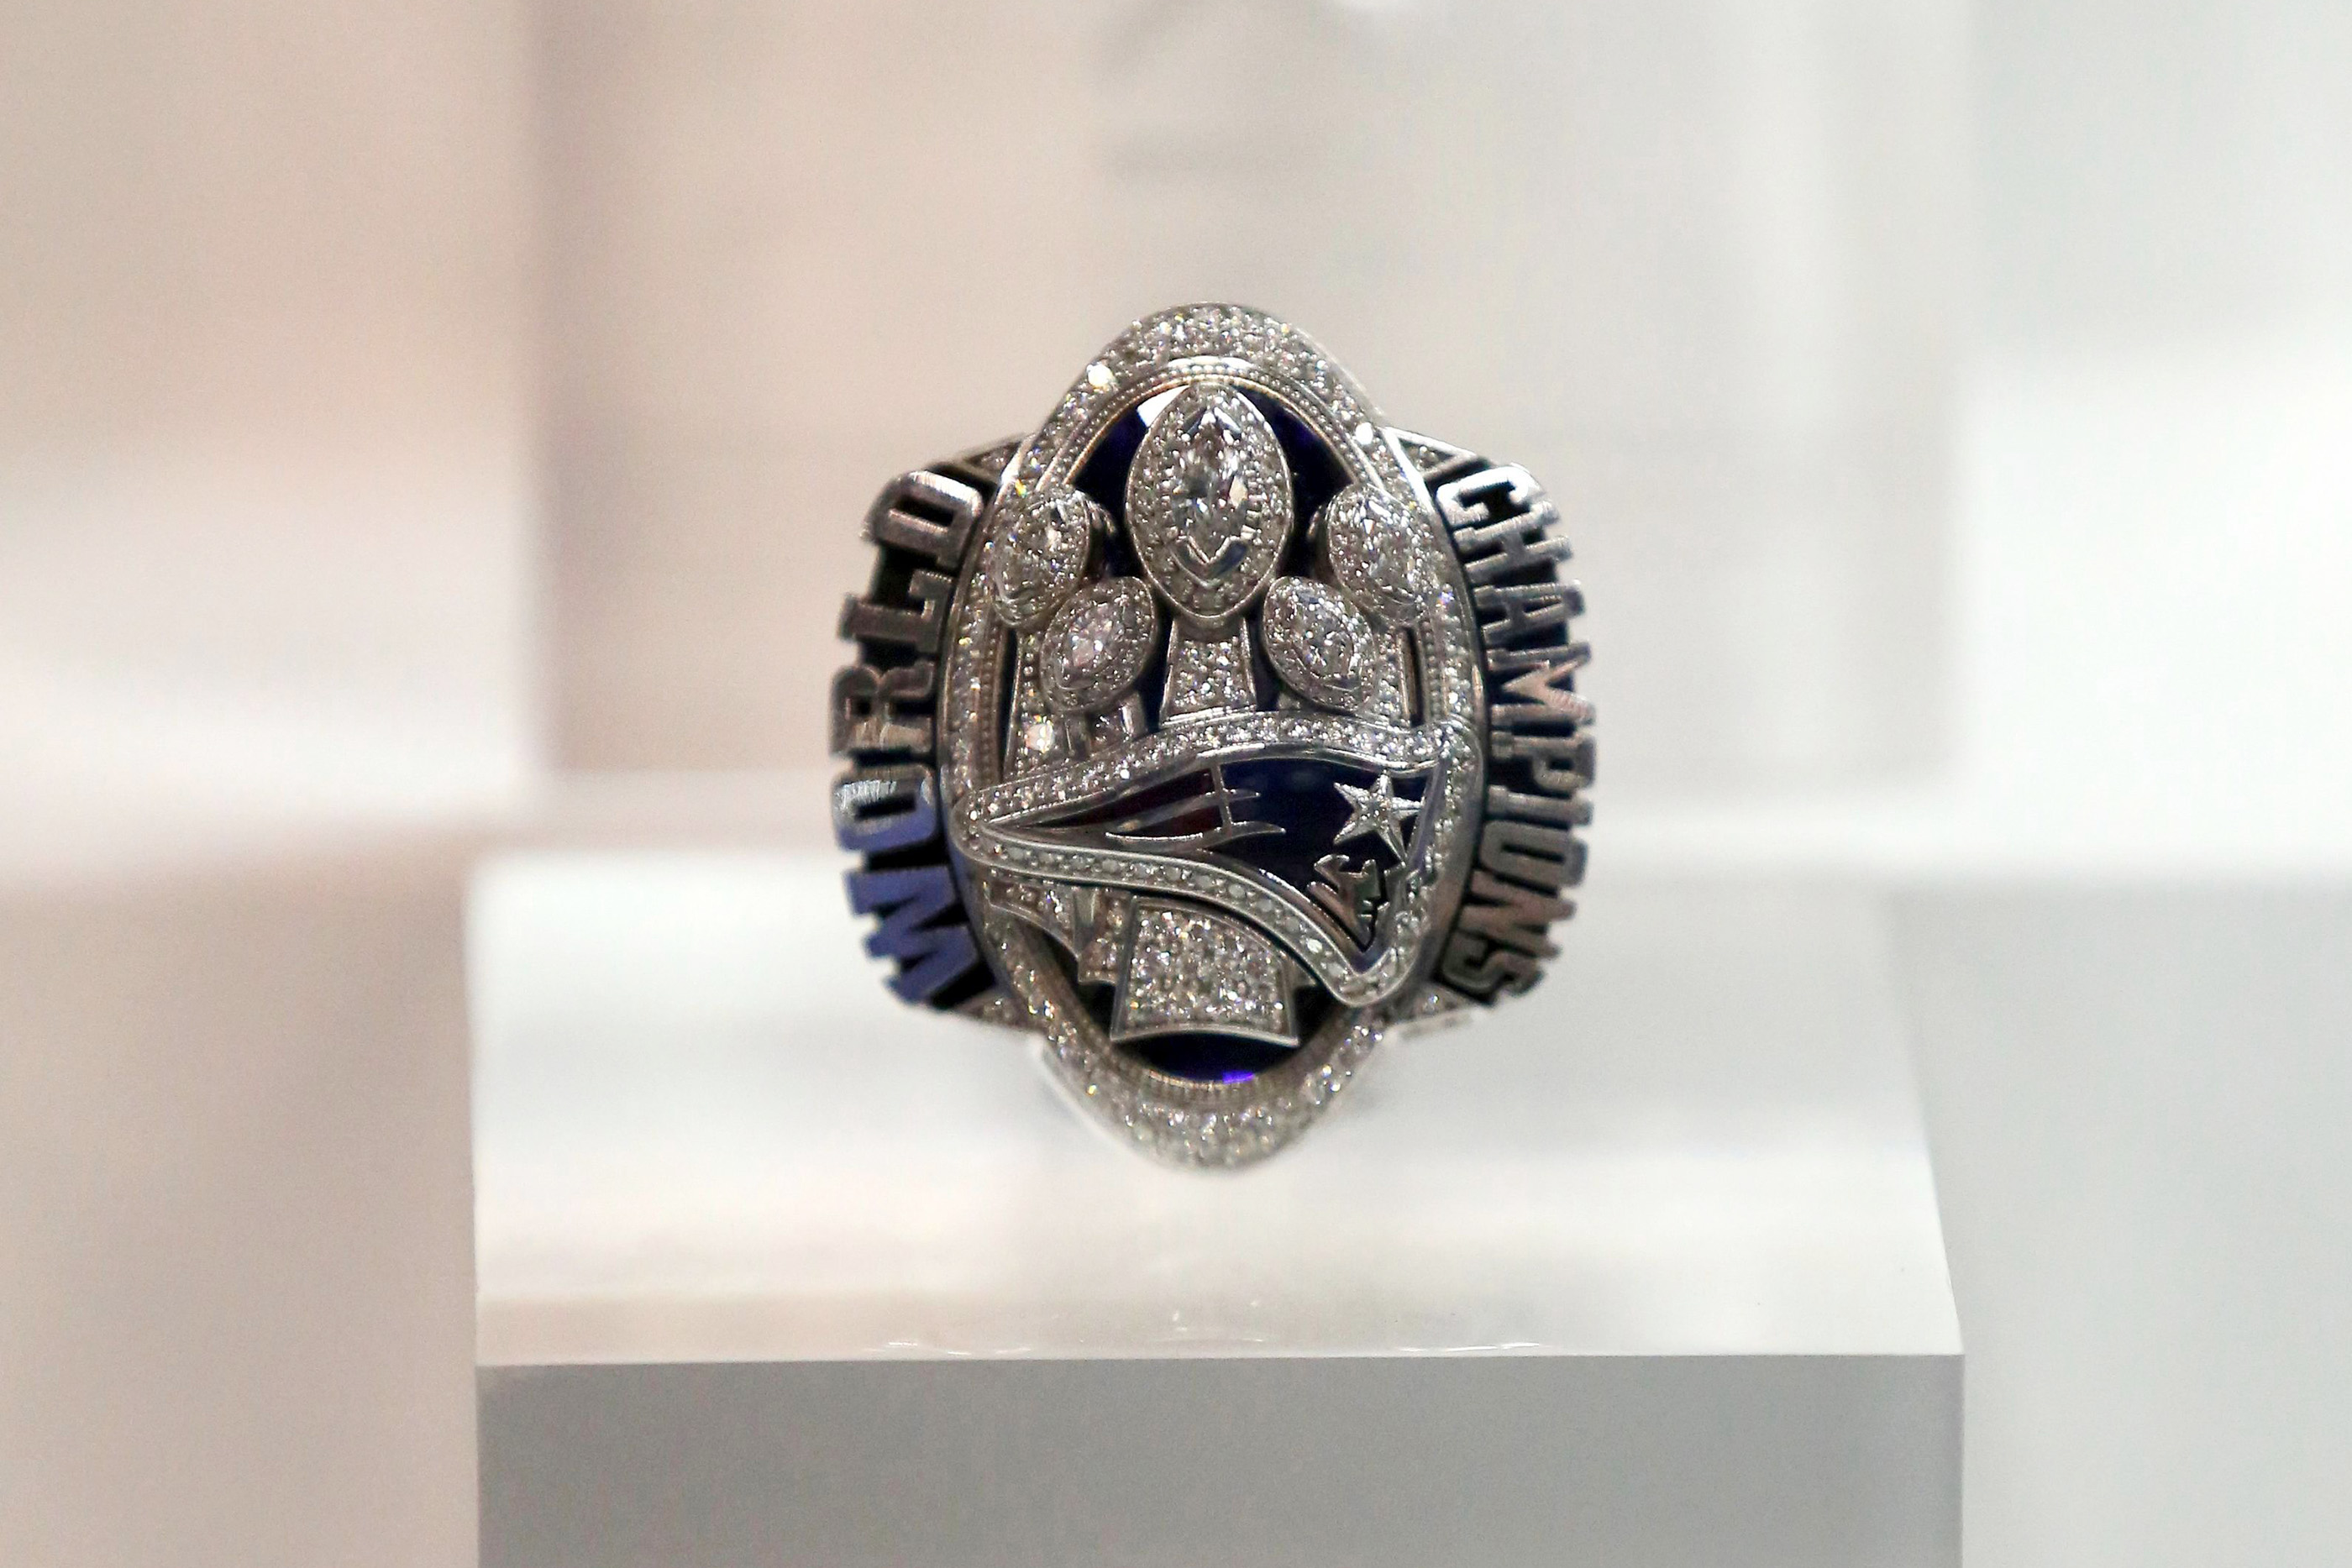 On This Date: Seahawks Receive Super Bowl XLVIII Championship Rings